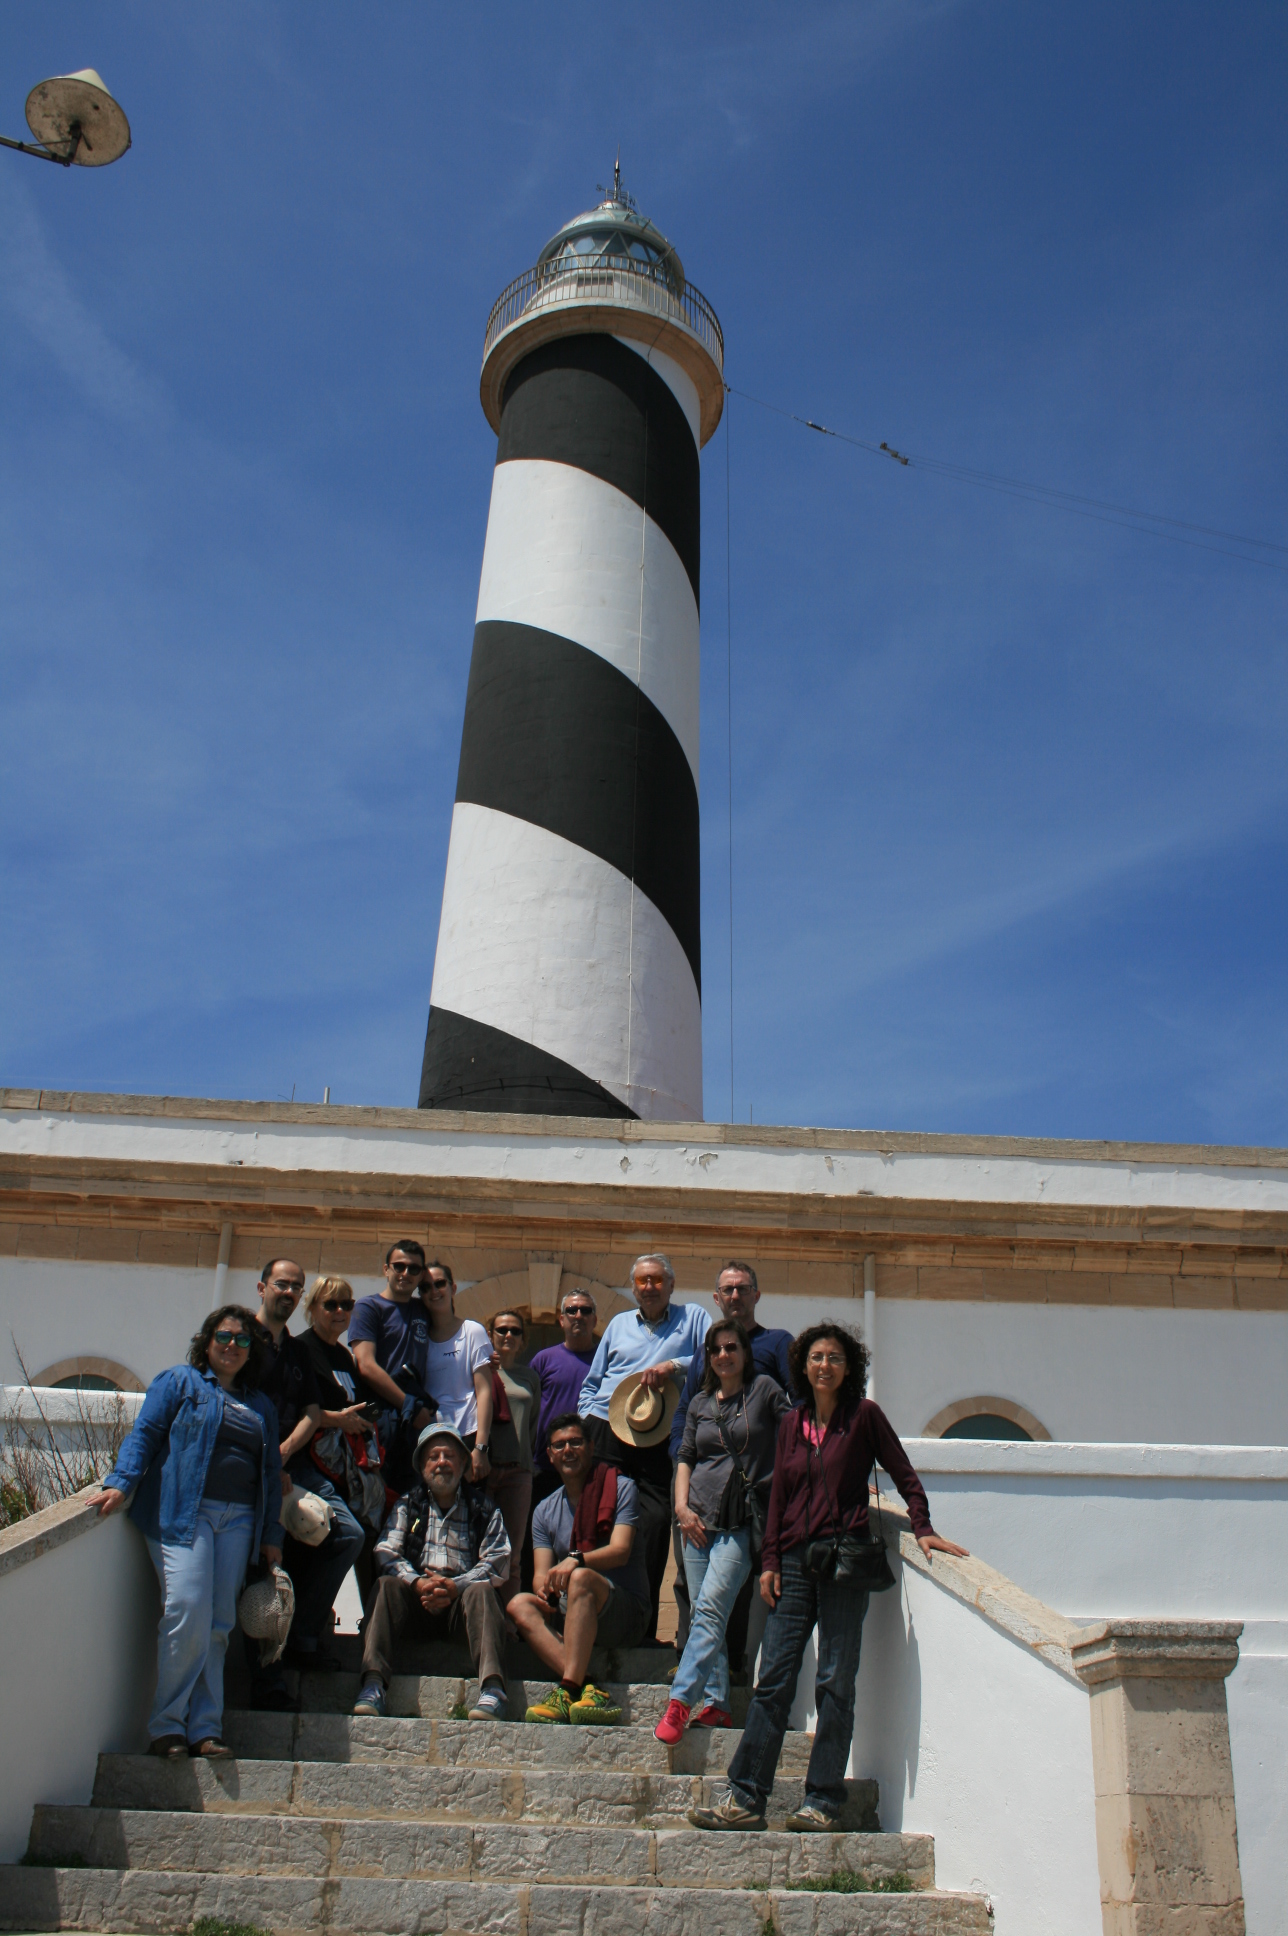 The 7th Meeting of the Tossa de Mar Lighthouse Keepers, Family and Friends comes to Mallorca